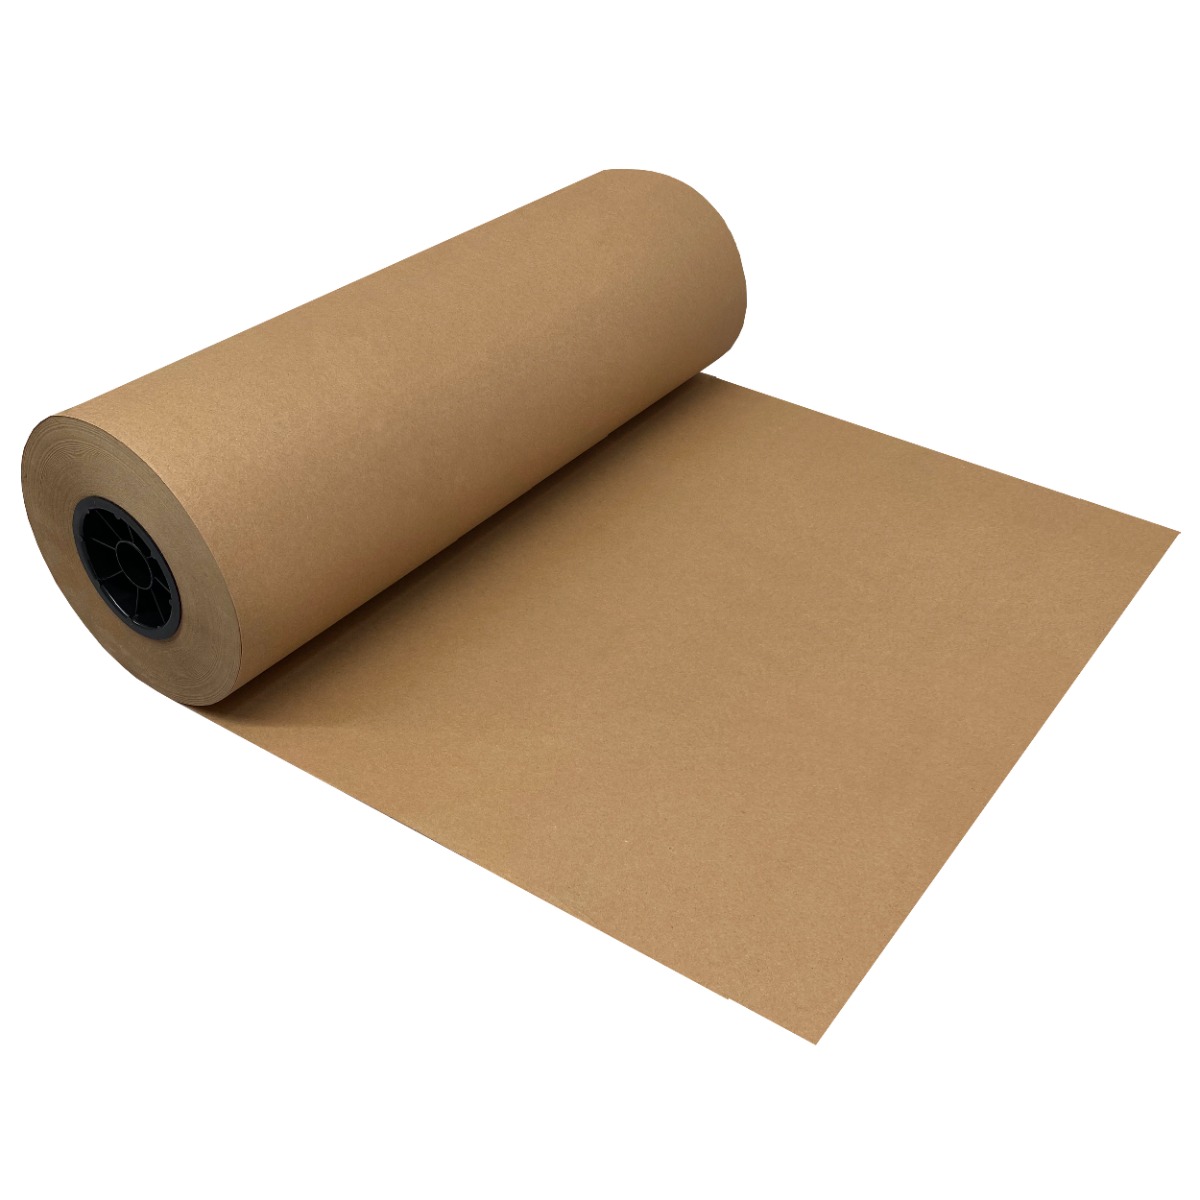 36 in Roll Wd, 600 ft Roll Lg, Kraft Paper - 5PGP4